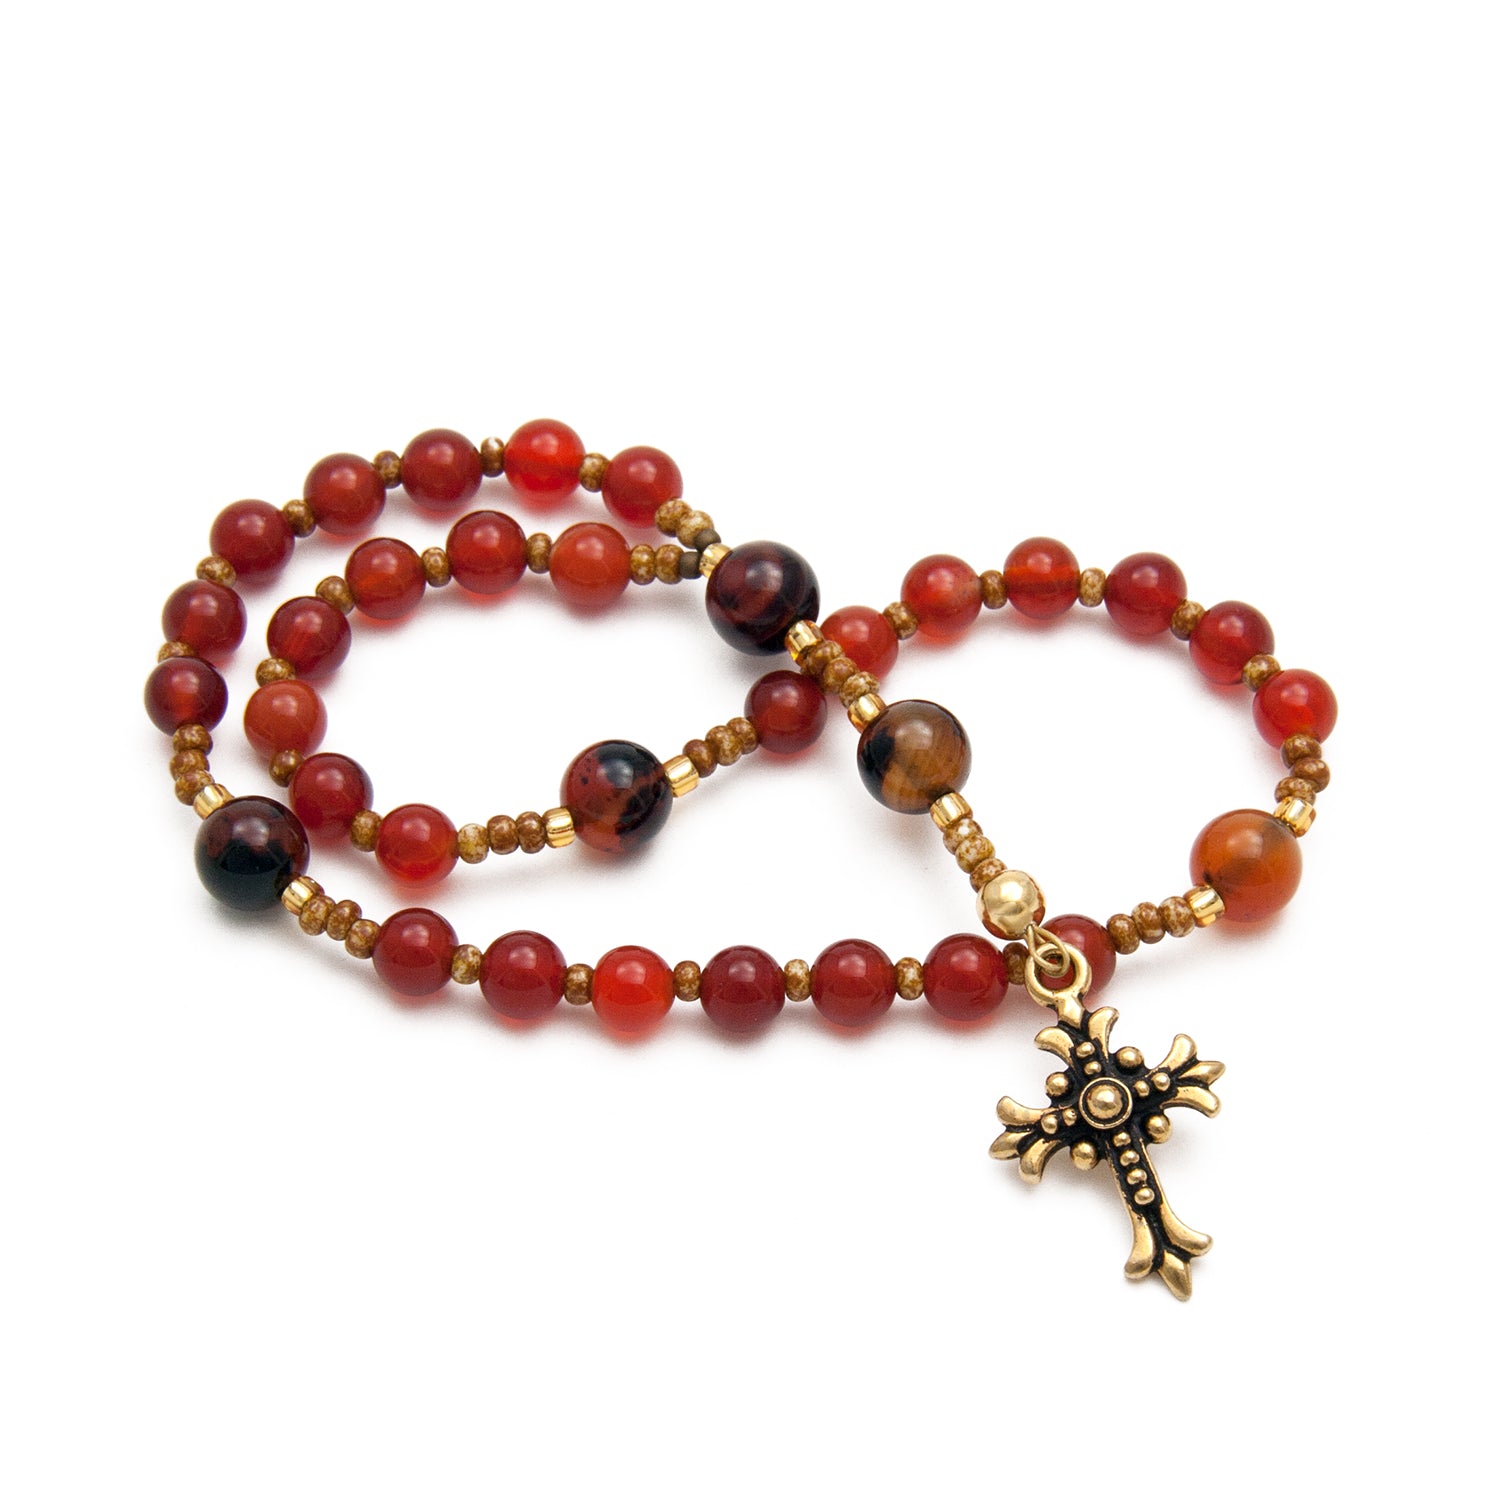 Carnelian and Agate Christian Protestant Prayer Beads